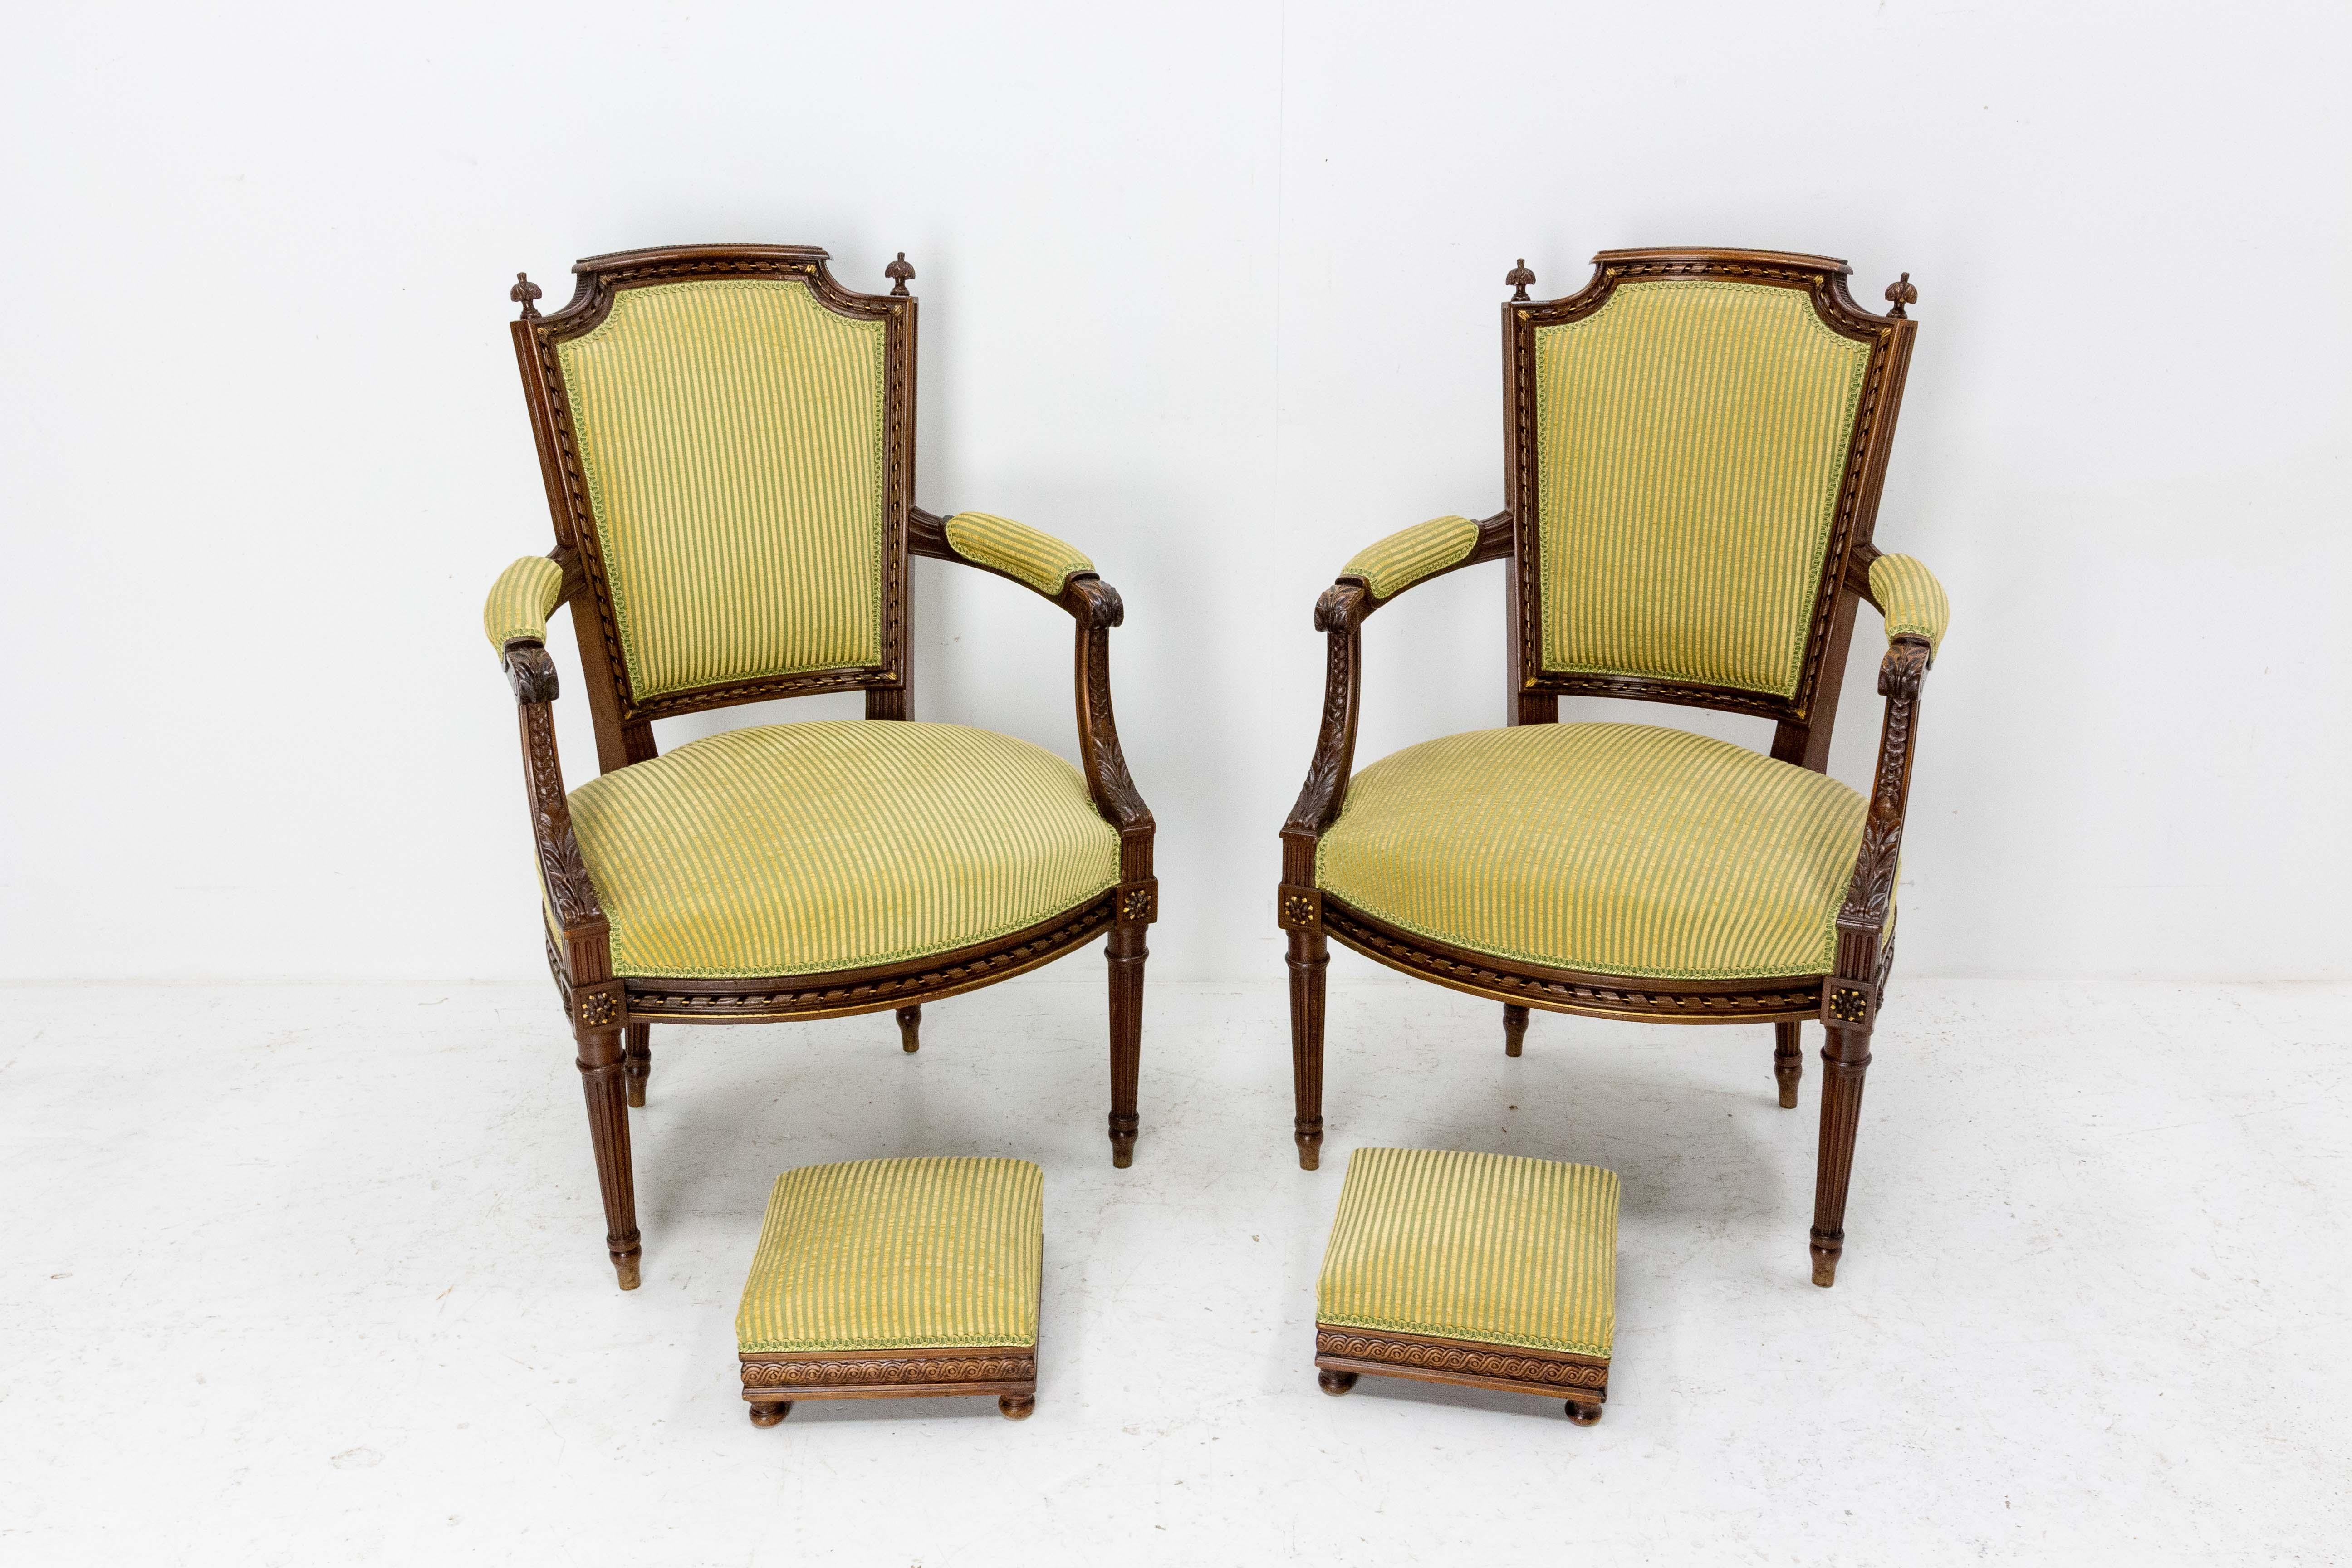 Pair of French fauteuils, open armchairs side or desk chairs Louis XVI revival,
Very fine sculptures with golden elements. Vegetal motifs: flowers and leaves and geometrical patterns, fluted feet.
Fine and precise work, high quality pieces
Circa